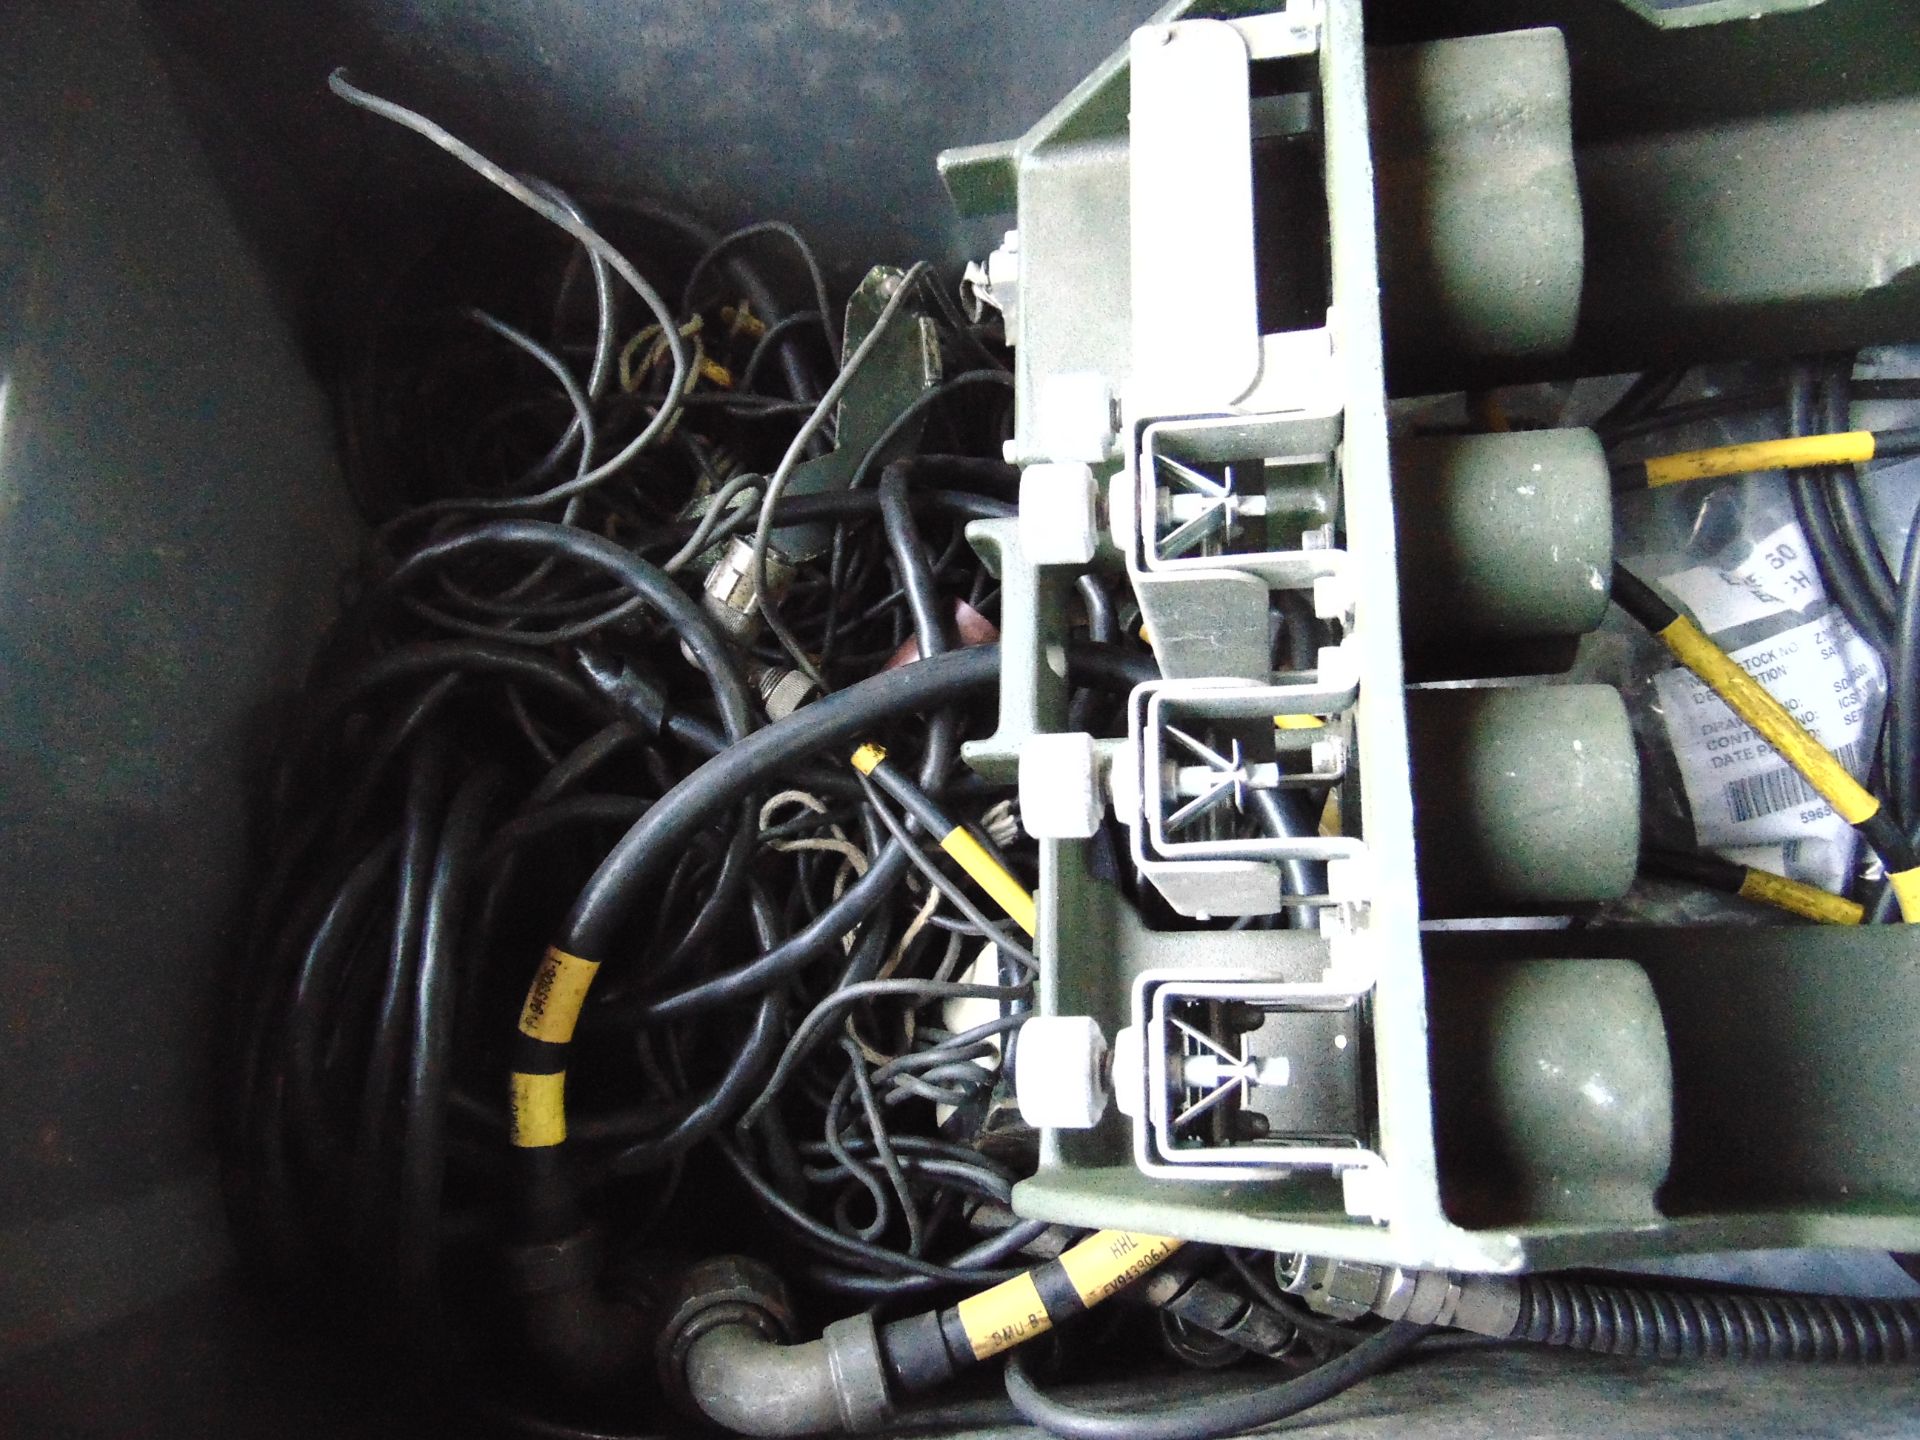 Clansman Radio Cables, Battery Charger ect - Image 4 of 5